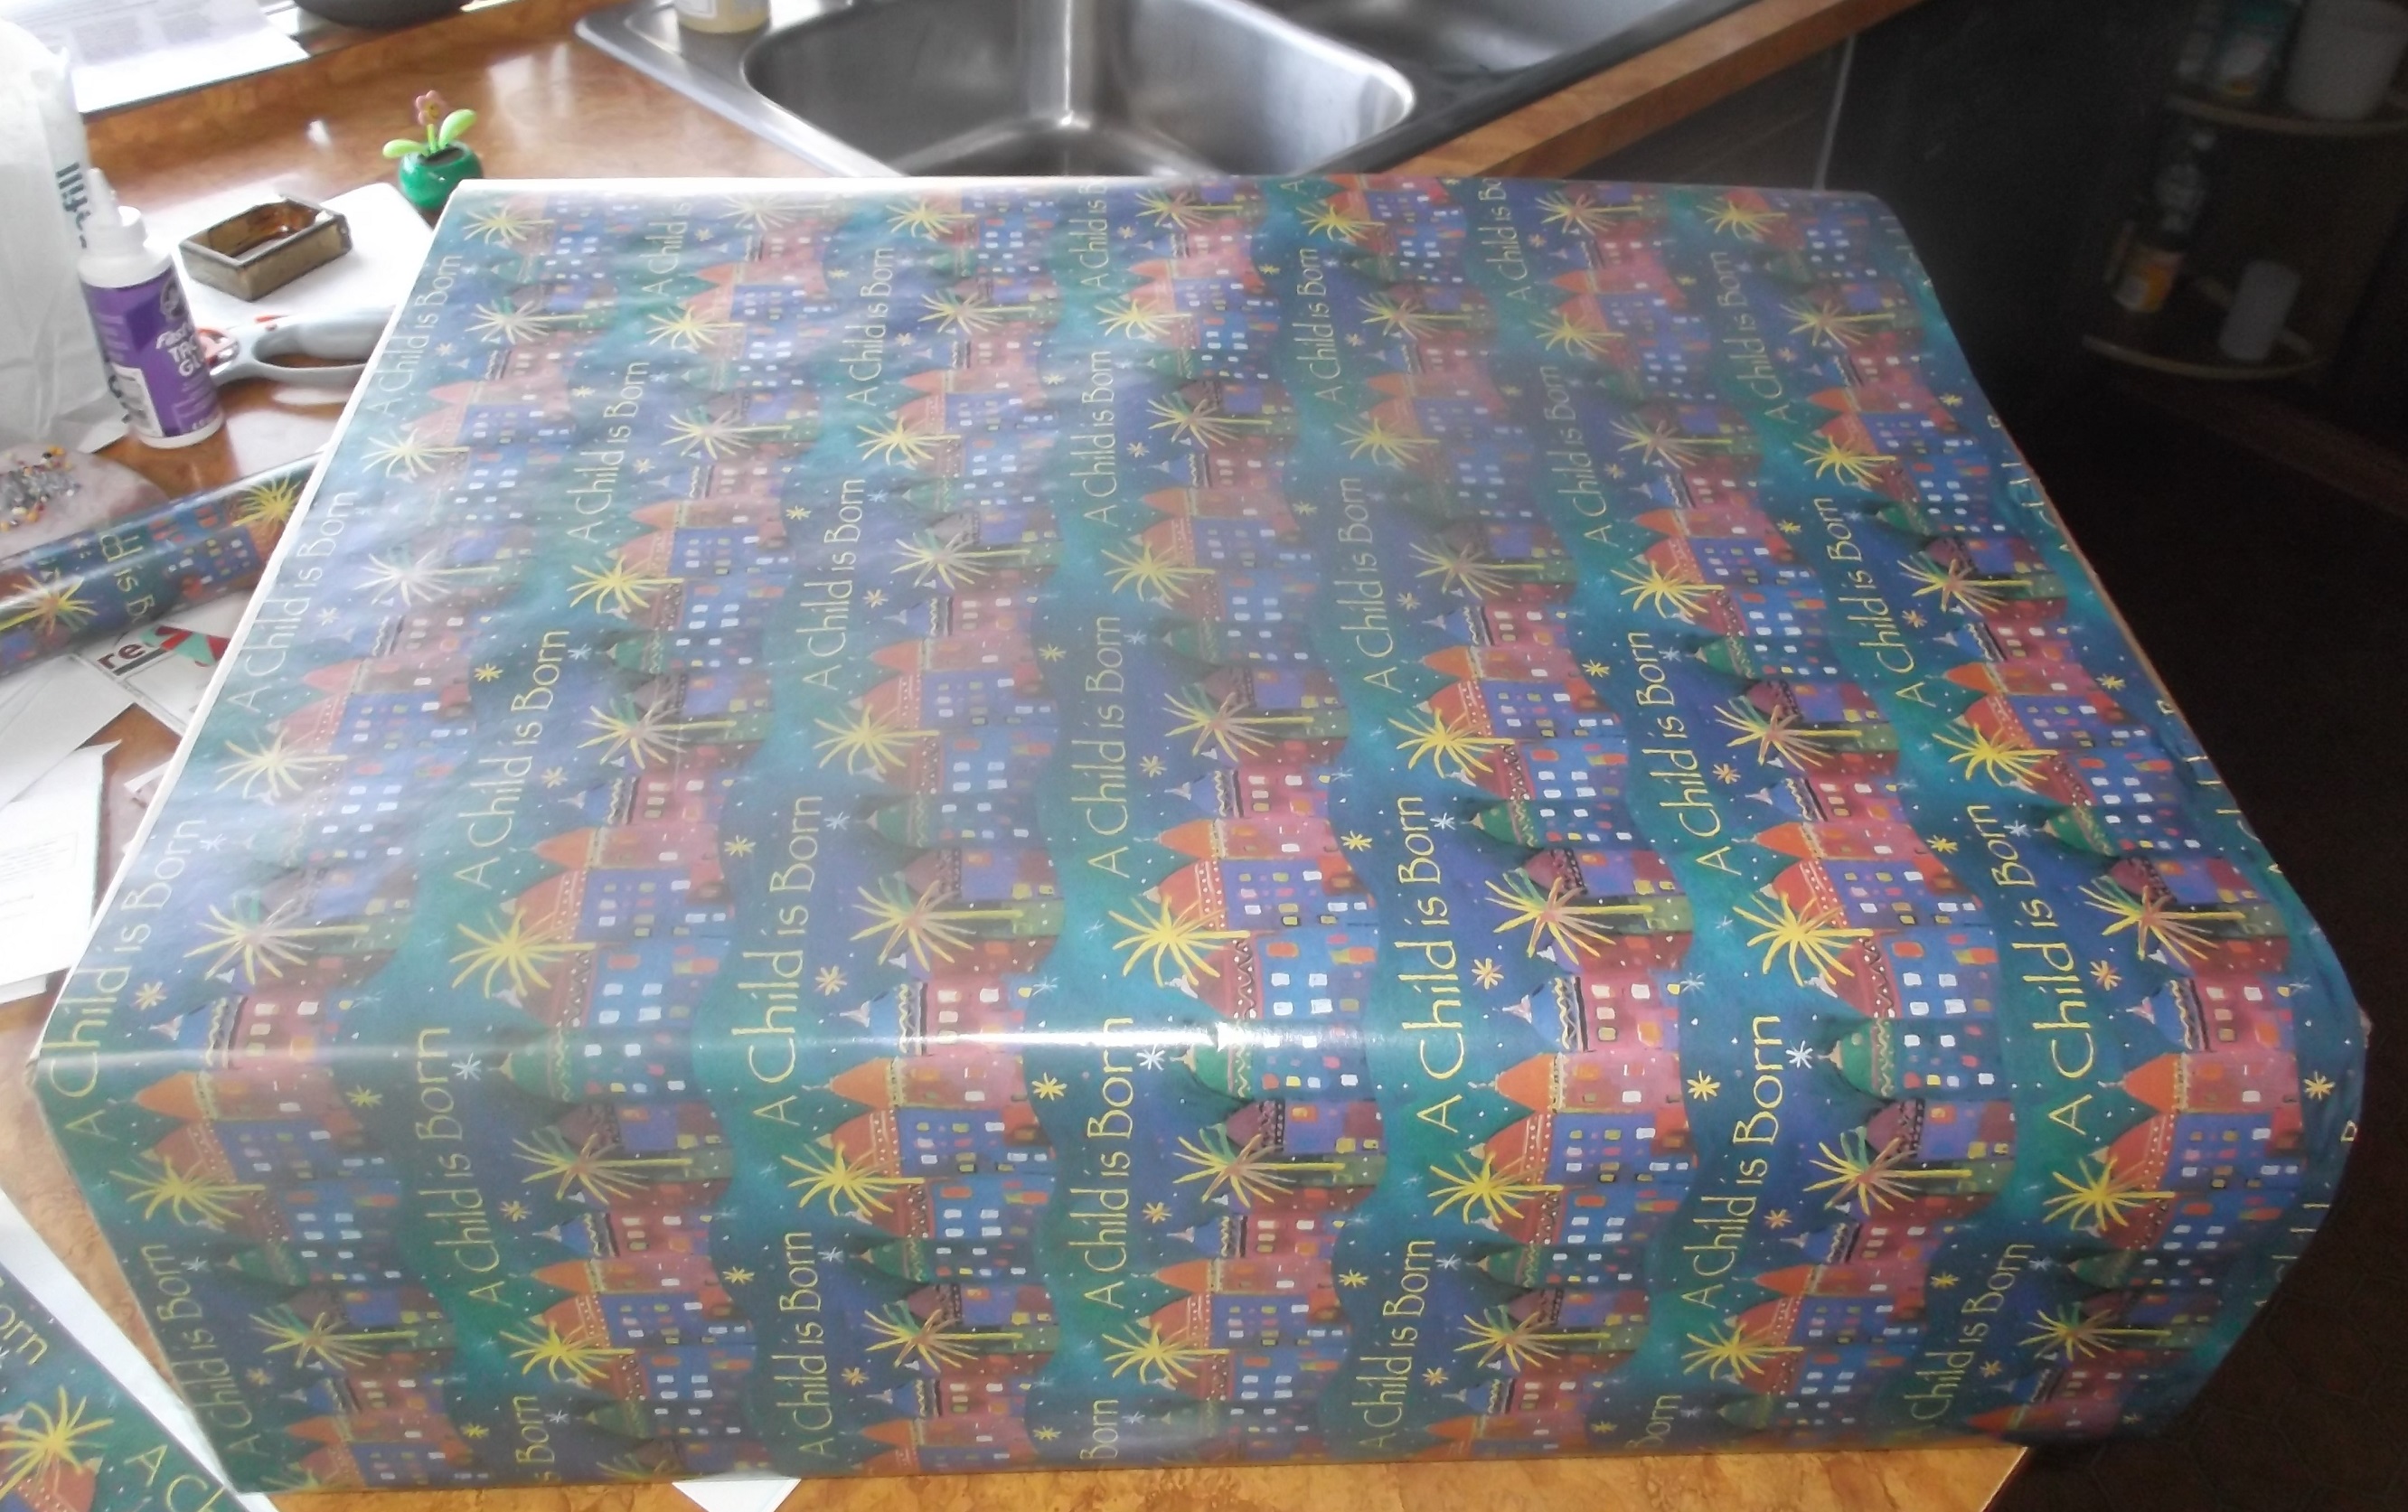 Photo I took of the largest gift that I needed to wrap